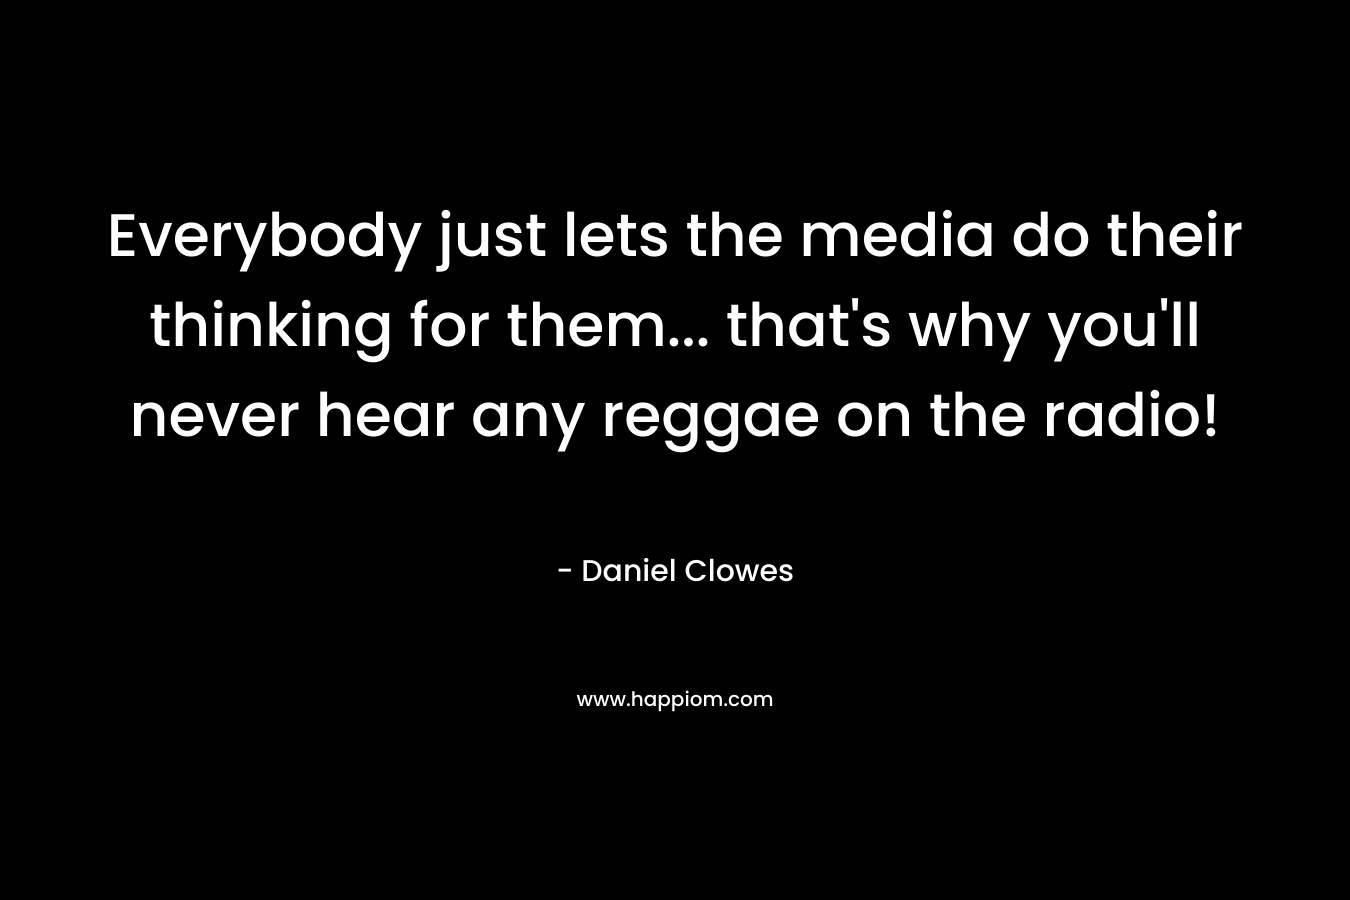 Everybody just lets the media do their thinking for them... that's why you'll never hear any reggae on the radio!